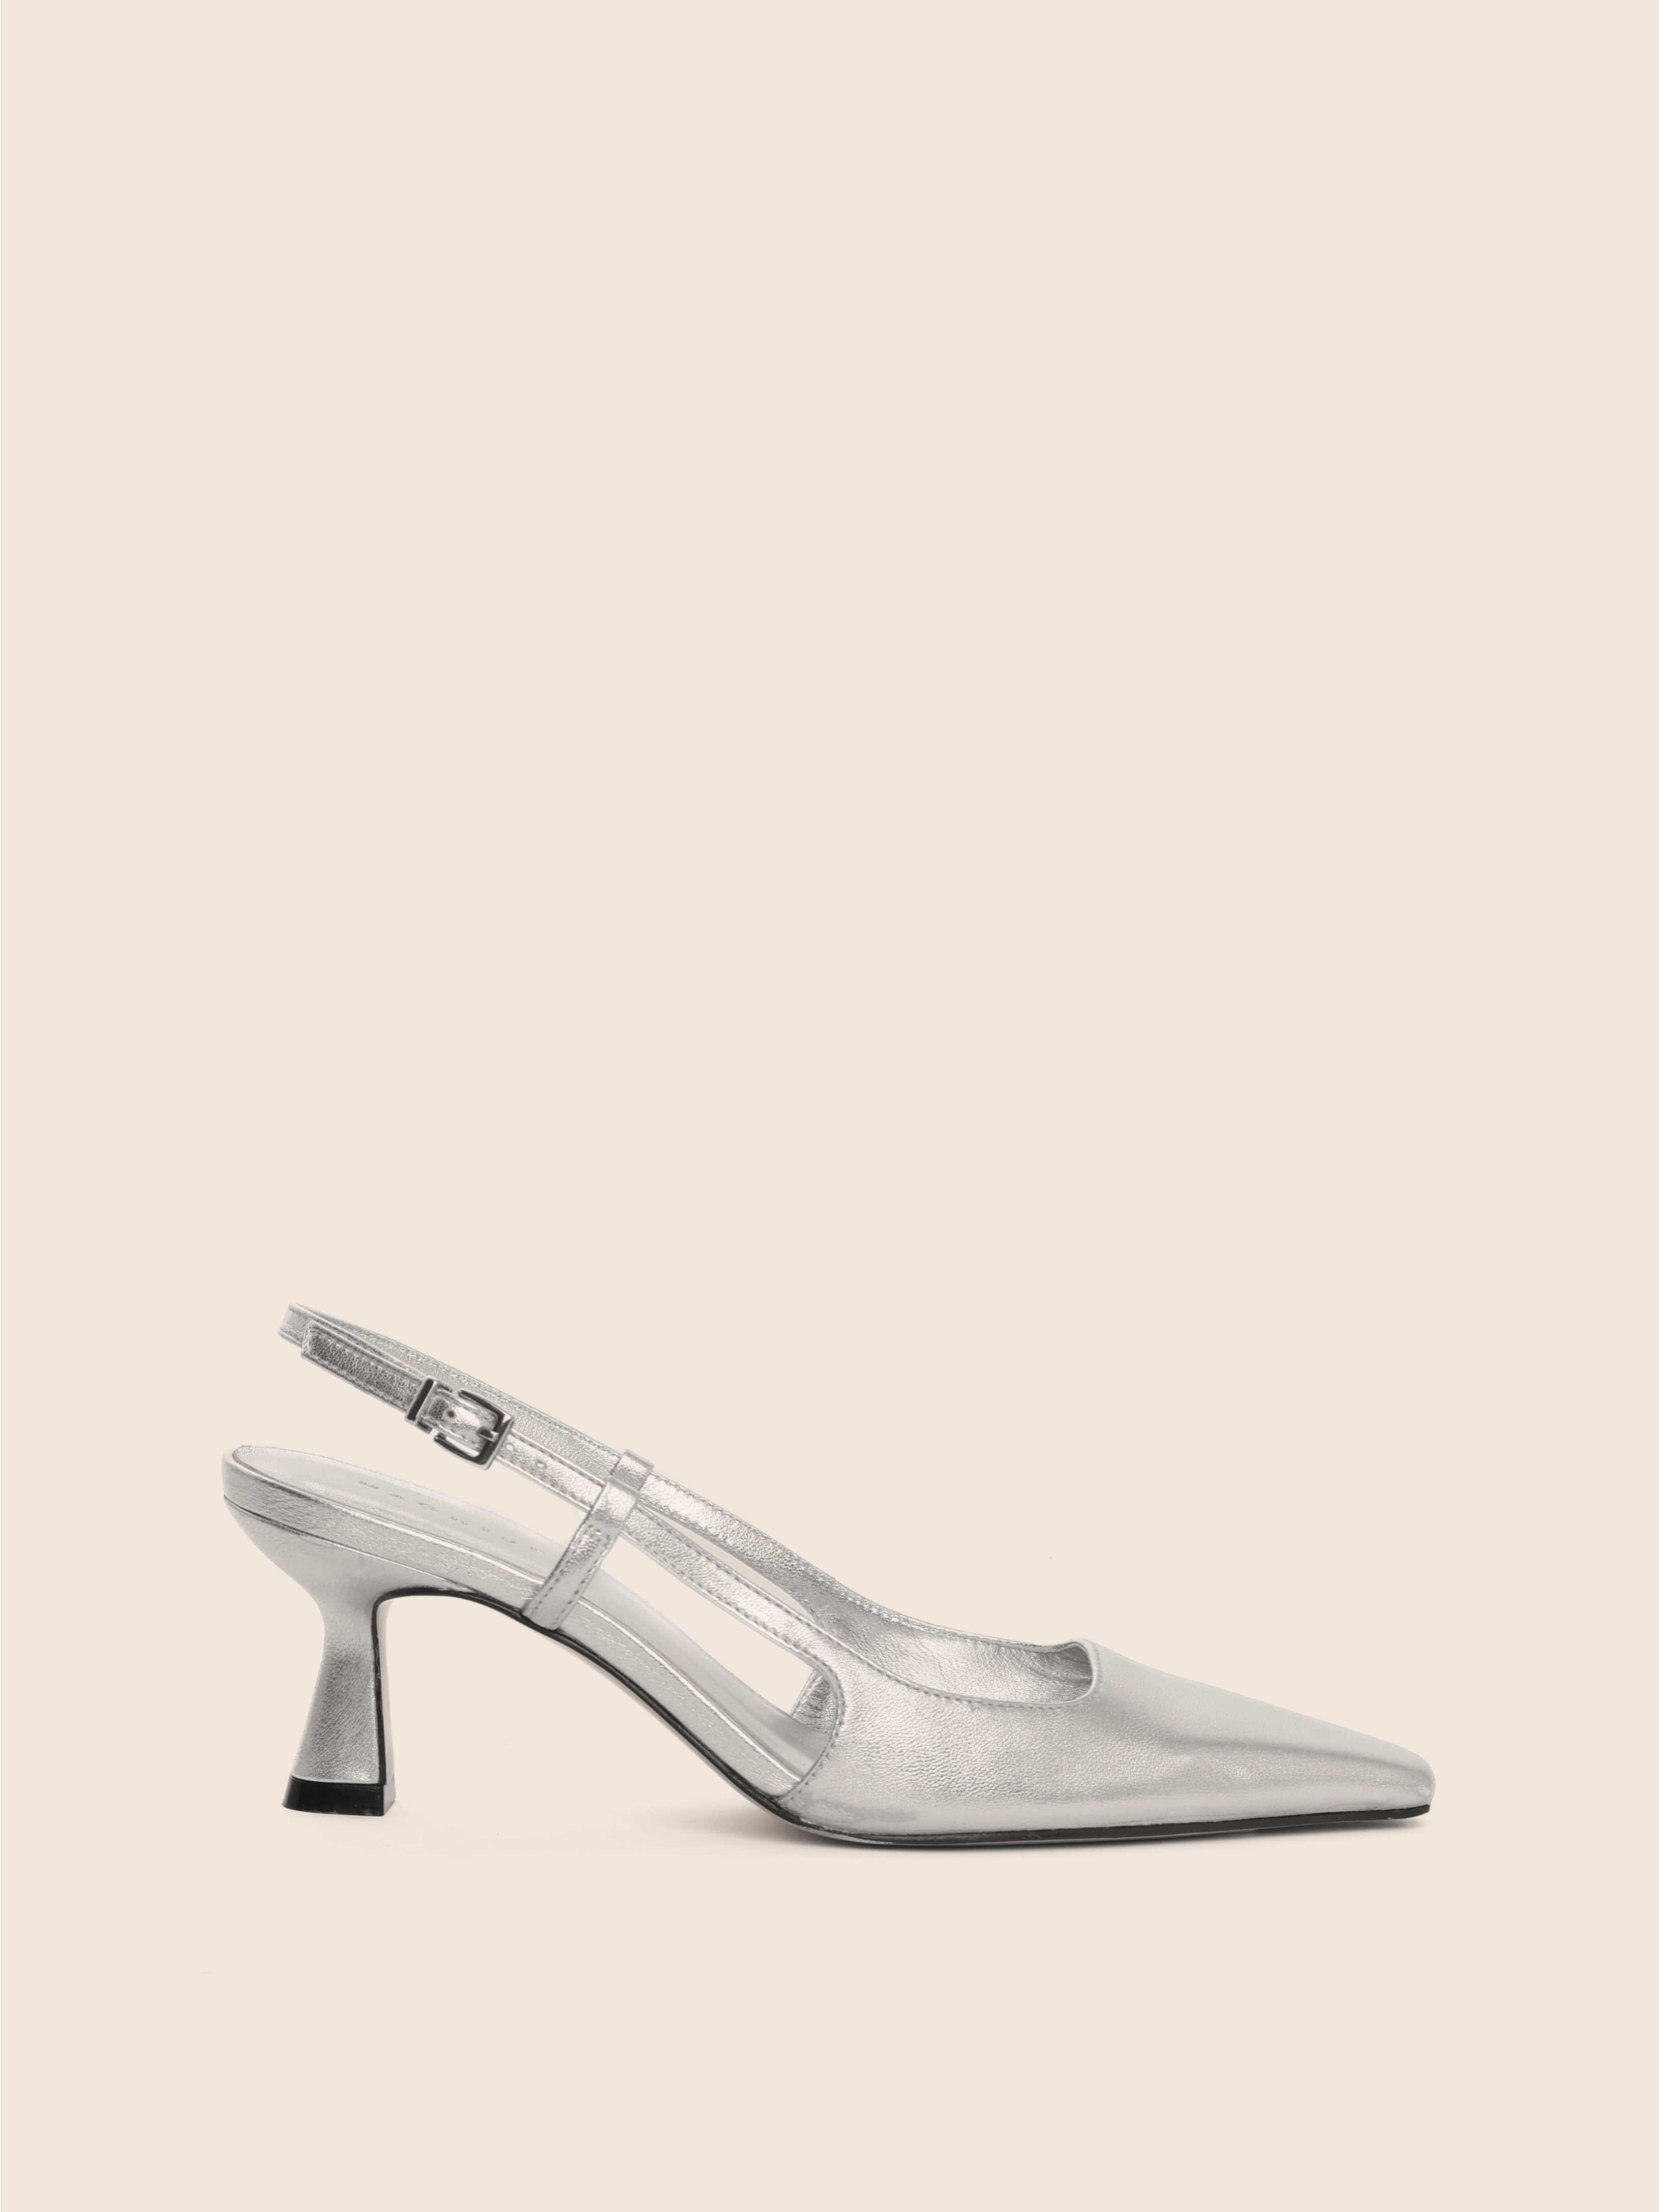 23 Best Silver Wedding Shoes for Brides - hitched.co.uk - hitched.co.uk